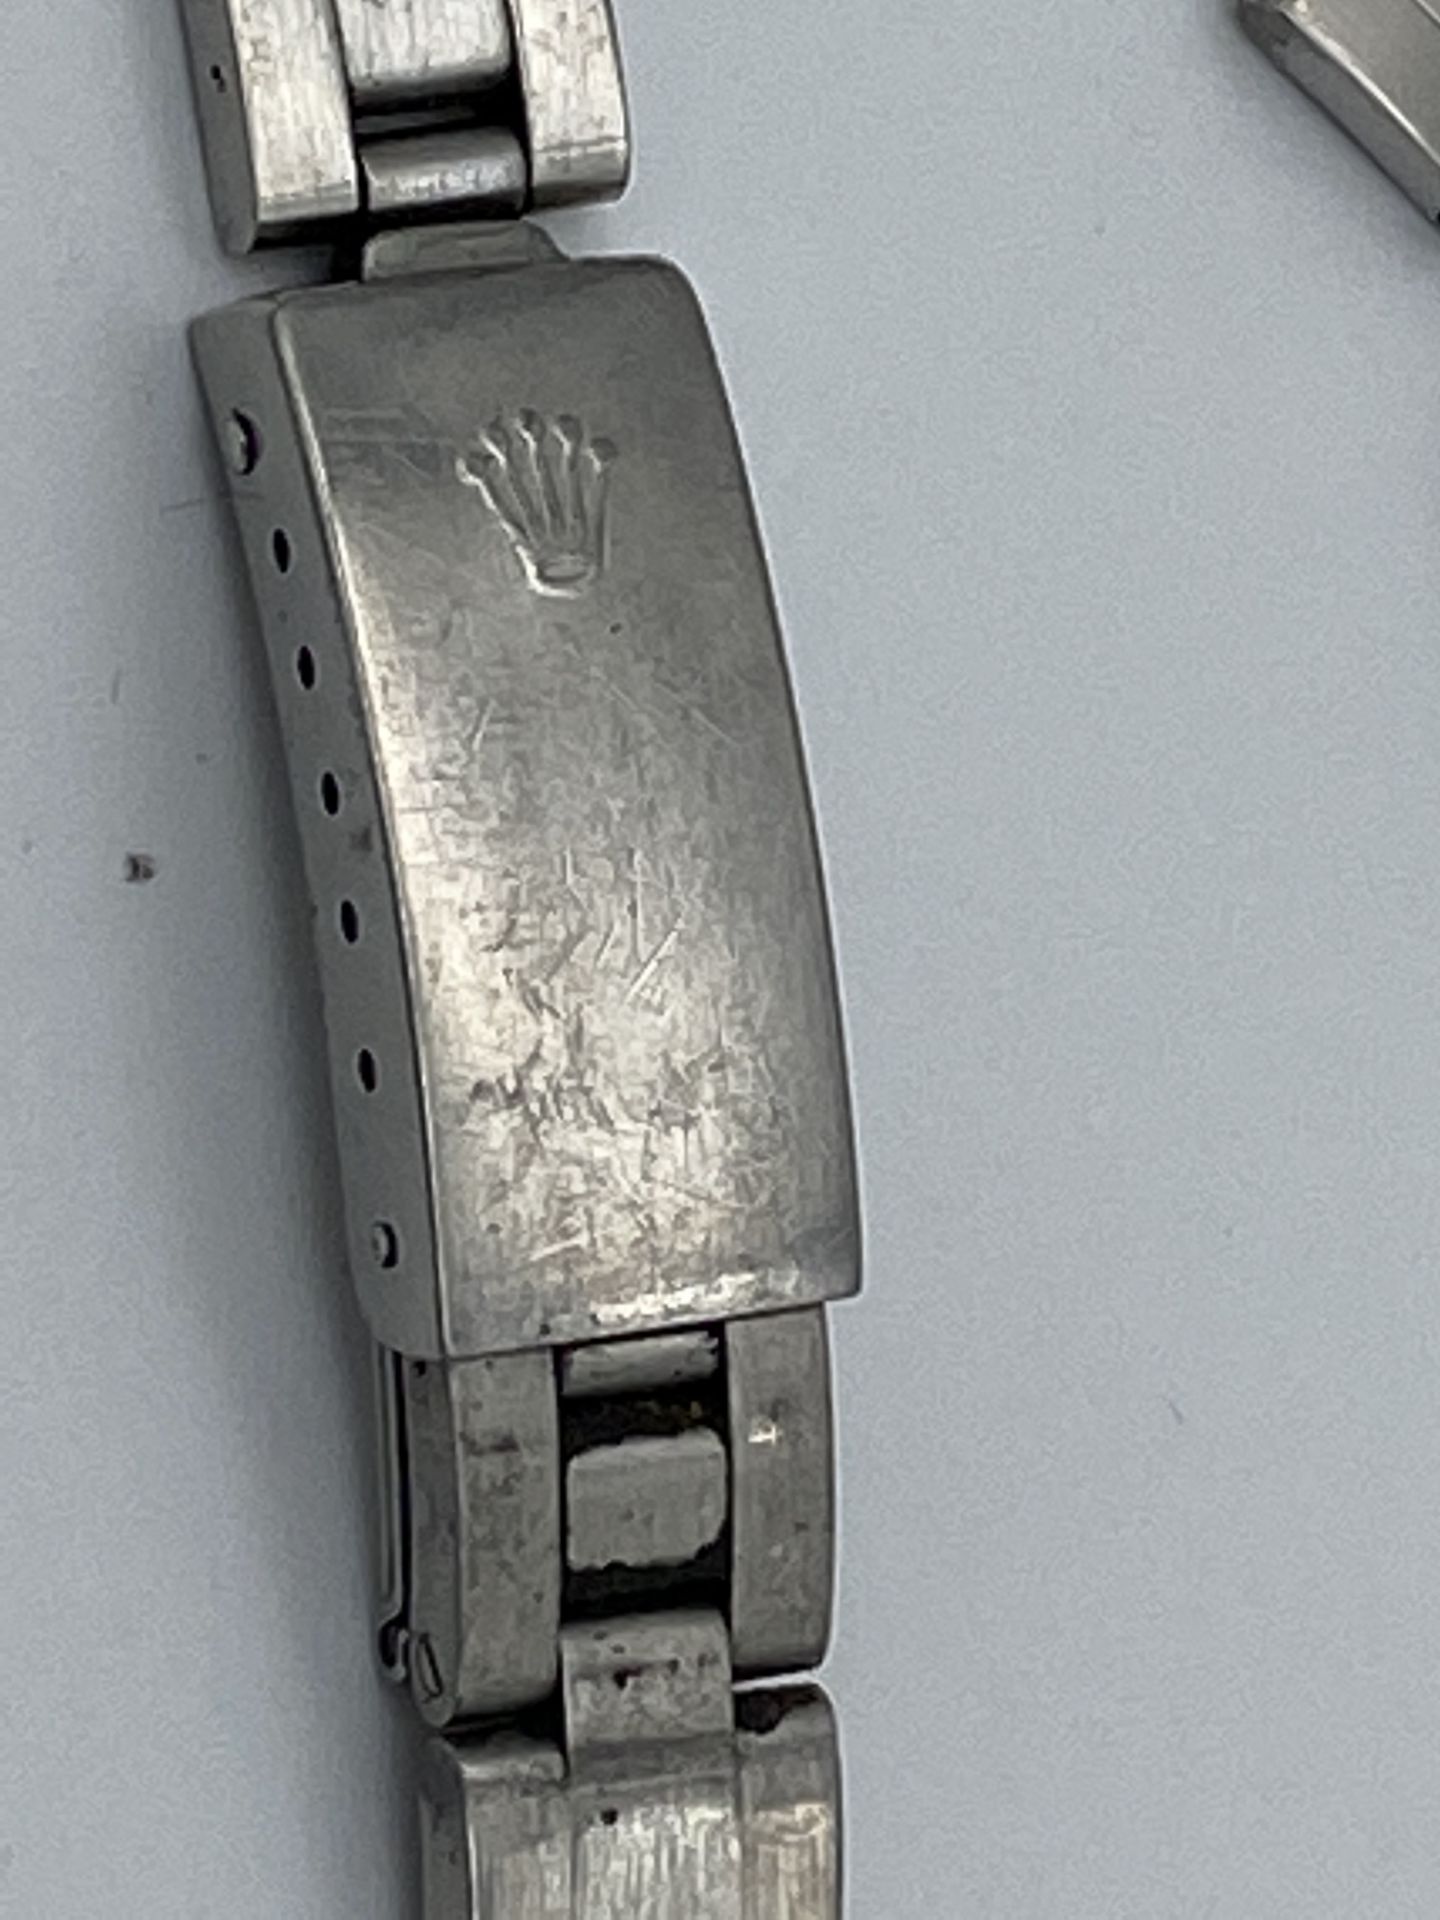 ROLEX STAINLESS STEEL WATCH STRAP - Image 5 of 7